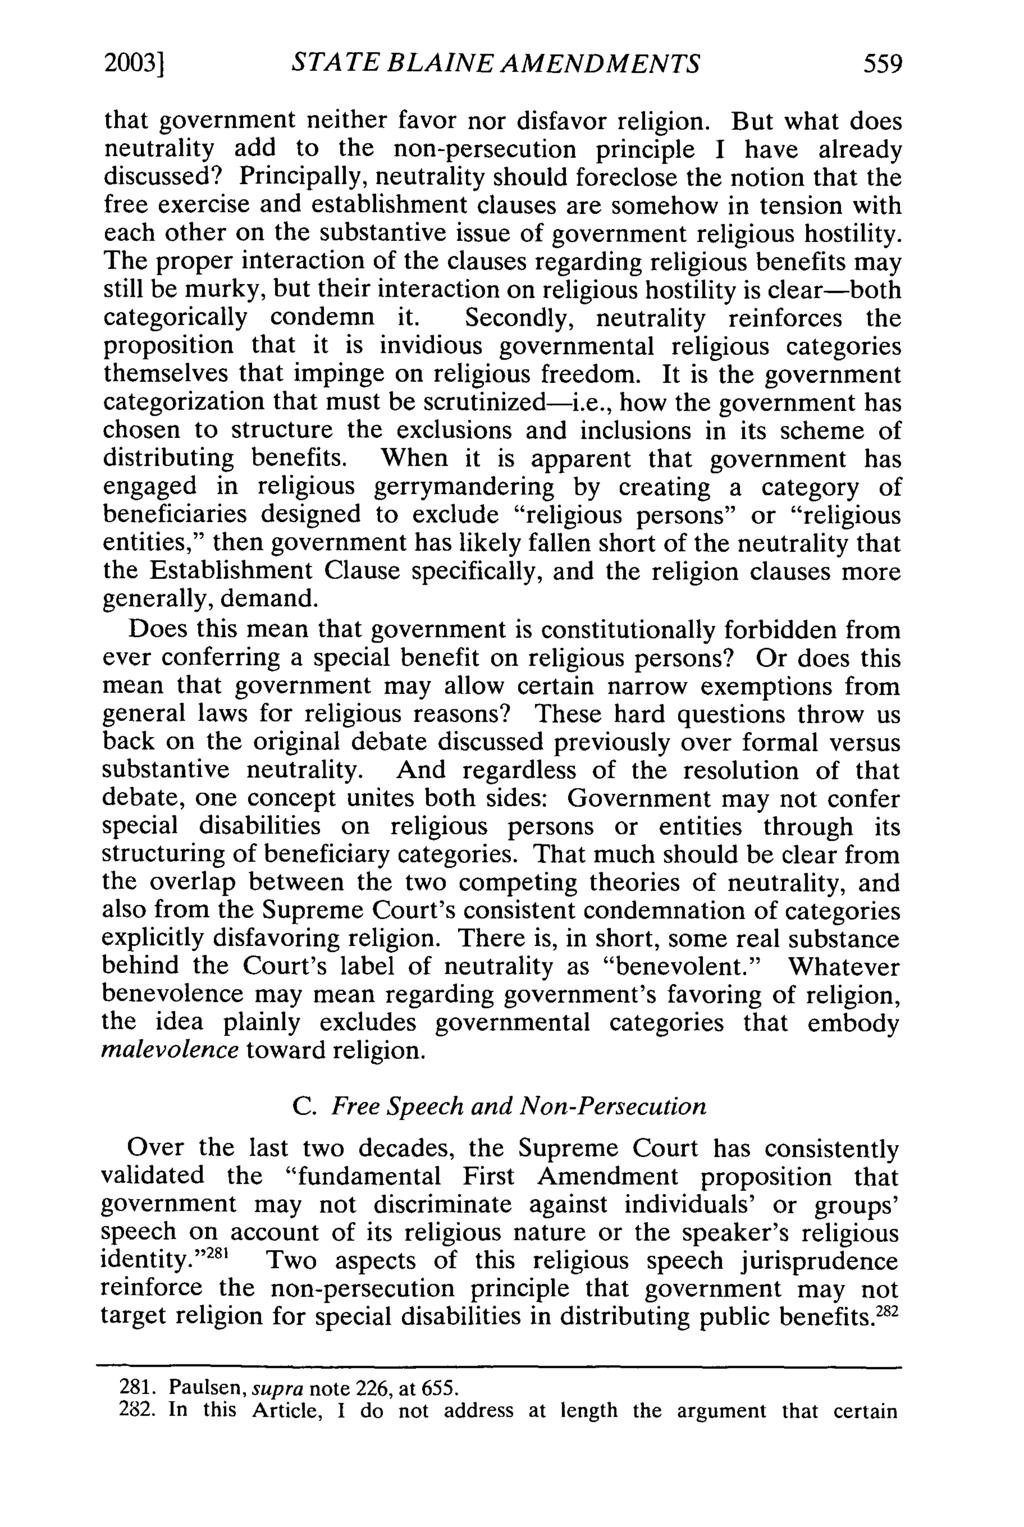 2003] STATE BLAINE AMENDMENTS that government neither favor nor disfavor religion. But what does neutrality add to the non-persecution principle I have already discussed?